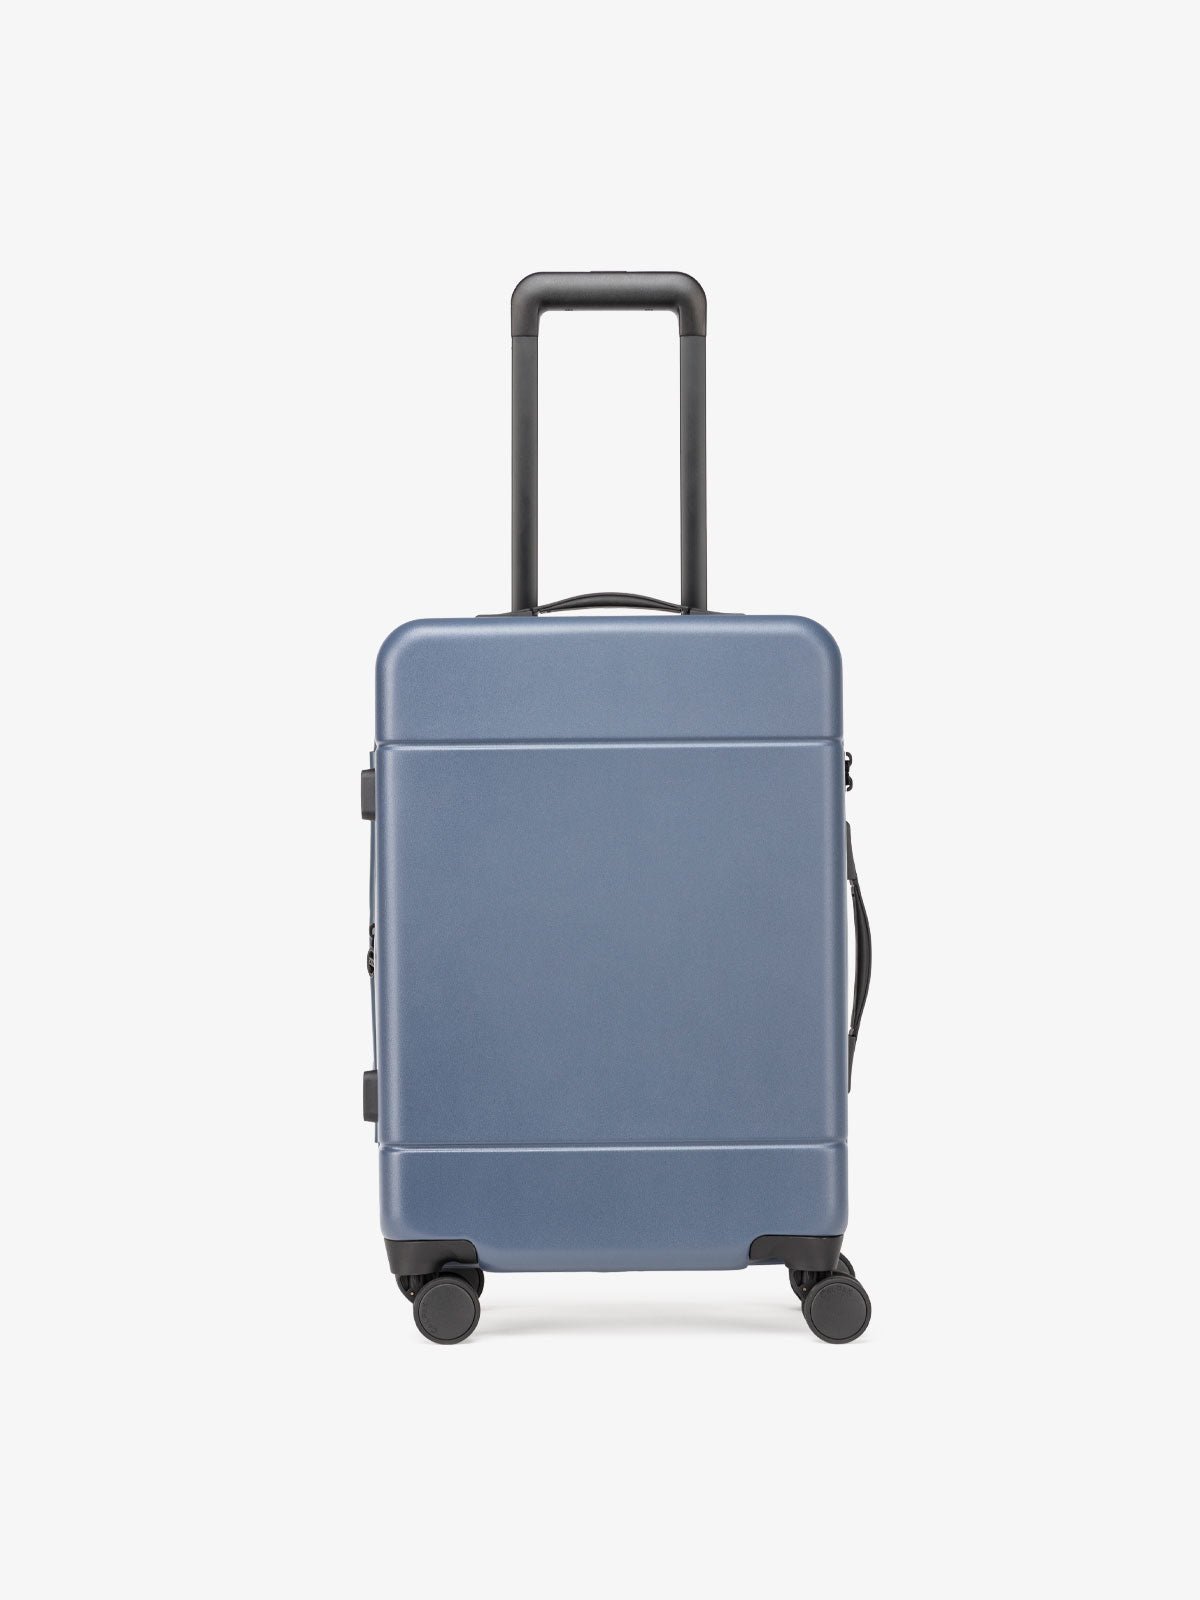 CALPAK Hue hard shell rolling carry-on luggage in blue atlantic color